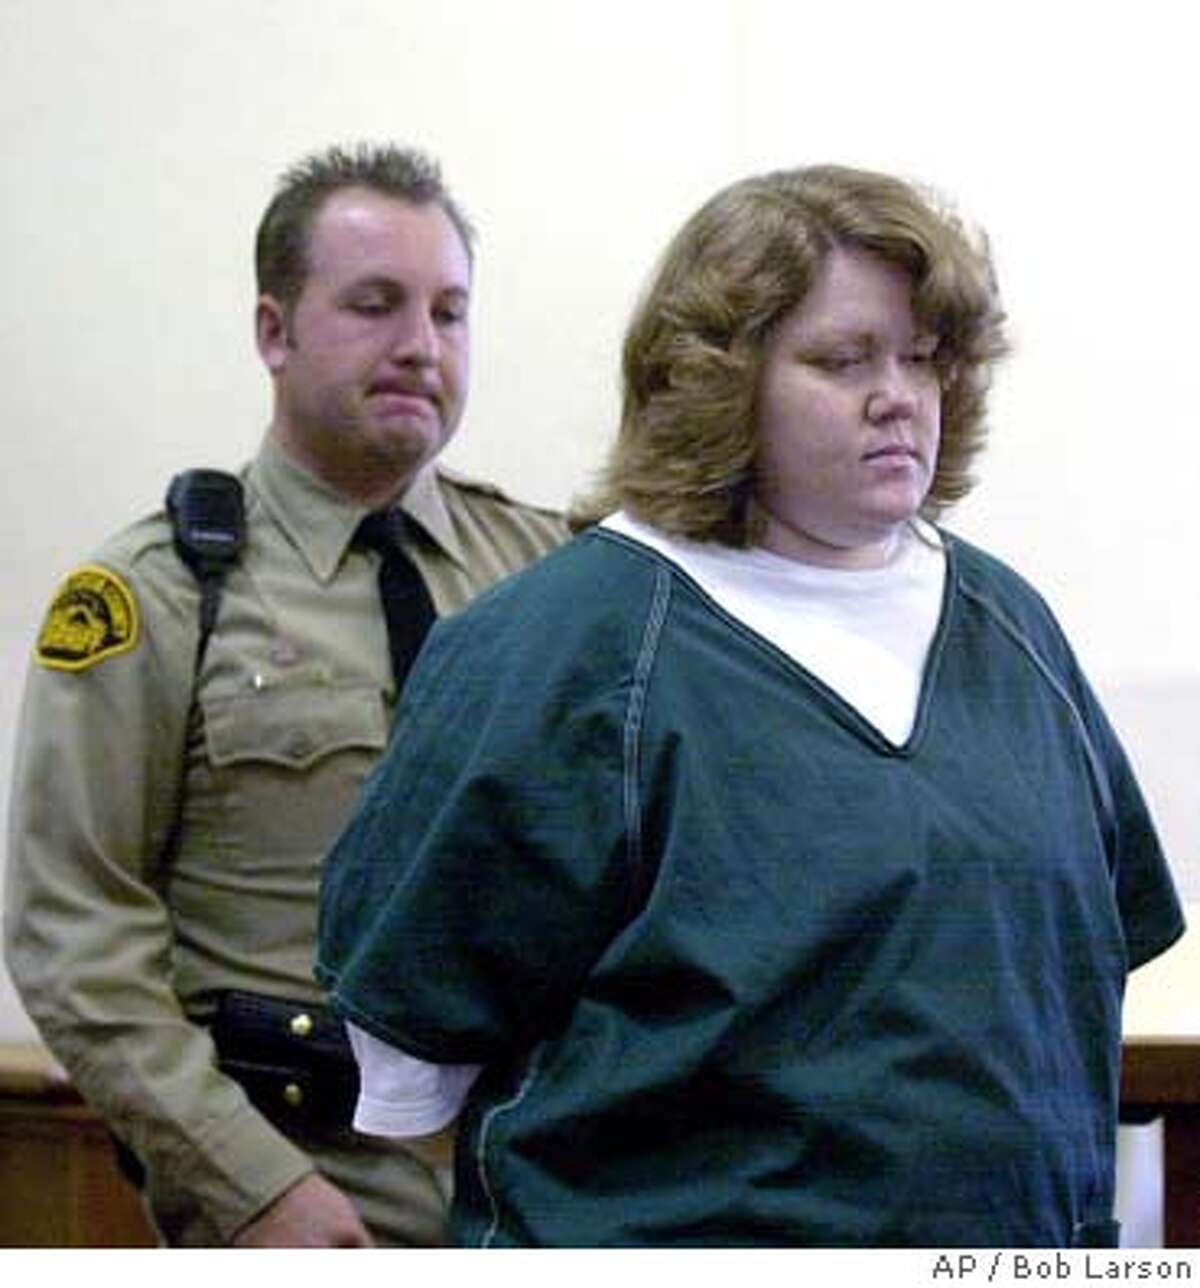 Dawn Godman, 27, is led into court for a preliminary hearing in Martinez, Cailf., Monday Dec. 3, 2001. Godman, Glenn Helzer, 31, his brother, Justin, 29, are accused of going on a killing spree that left five people dead including Selina Bishop, the daughter of blues guitarist Elvin Bishop. (AP Photo/Contra Costa Times, Bob Larson )